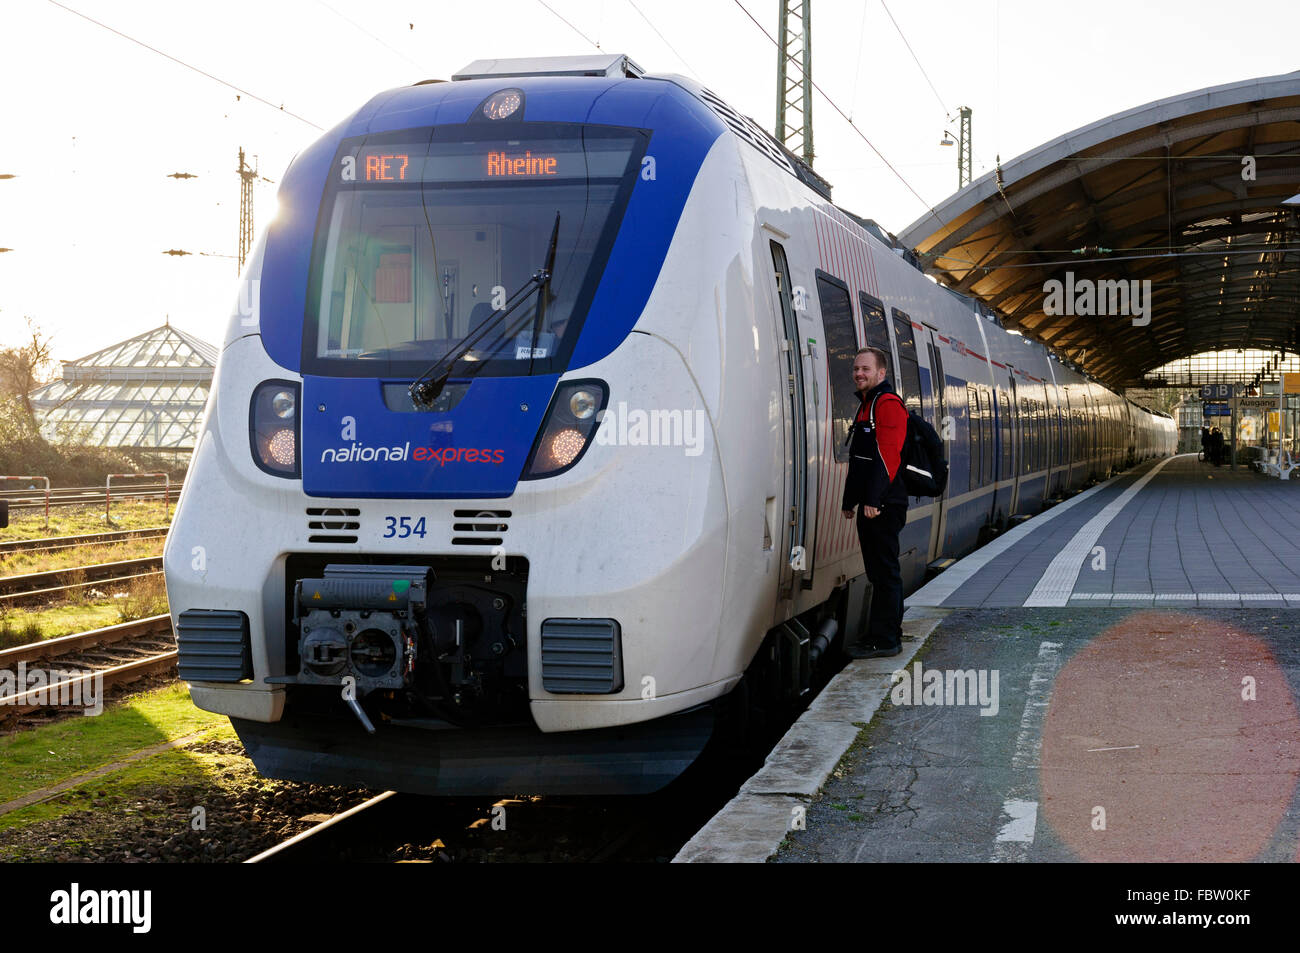 National Express Talent EMU train at Krefeld on RE7 service to Reine, Germany. Stock Photo